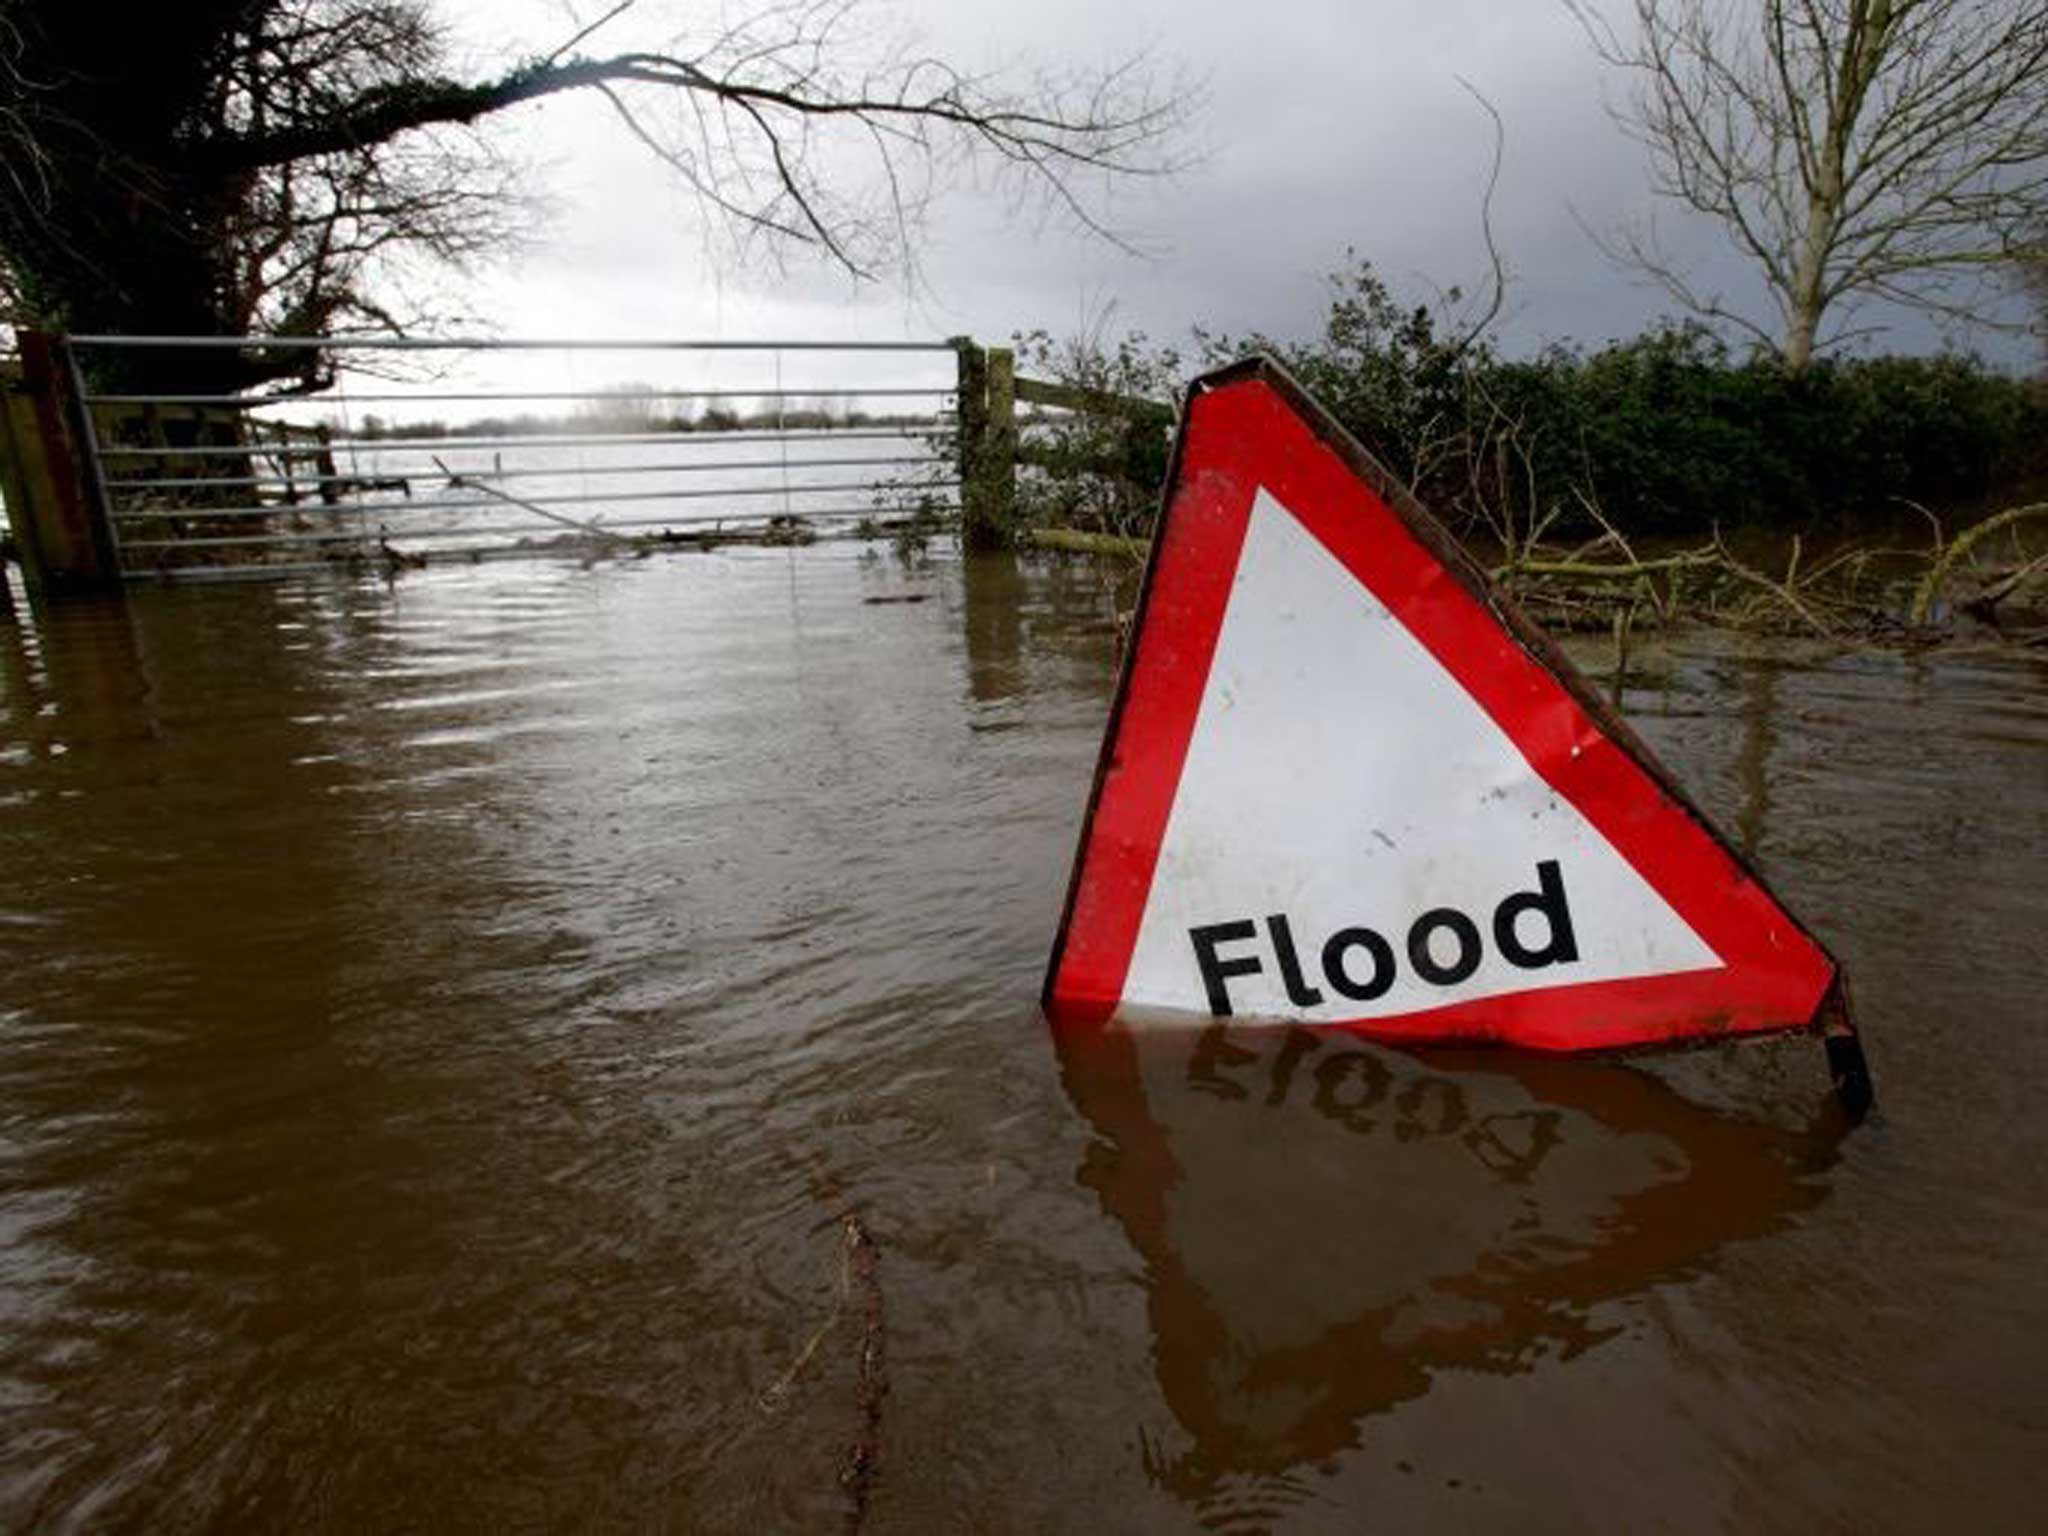 Money down the drain: Could your finances cope if events like a flood left you facing a big bill?